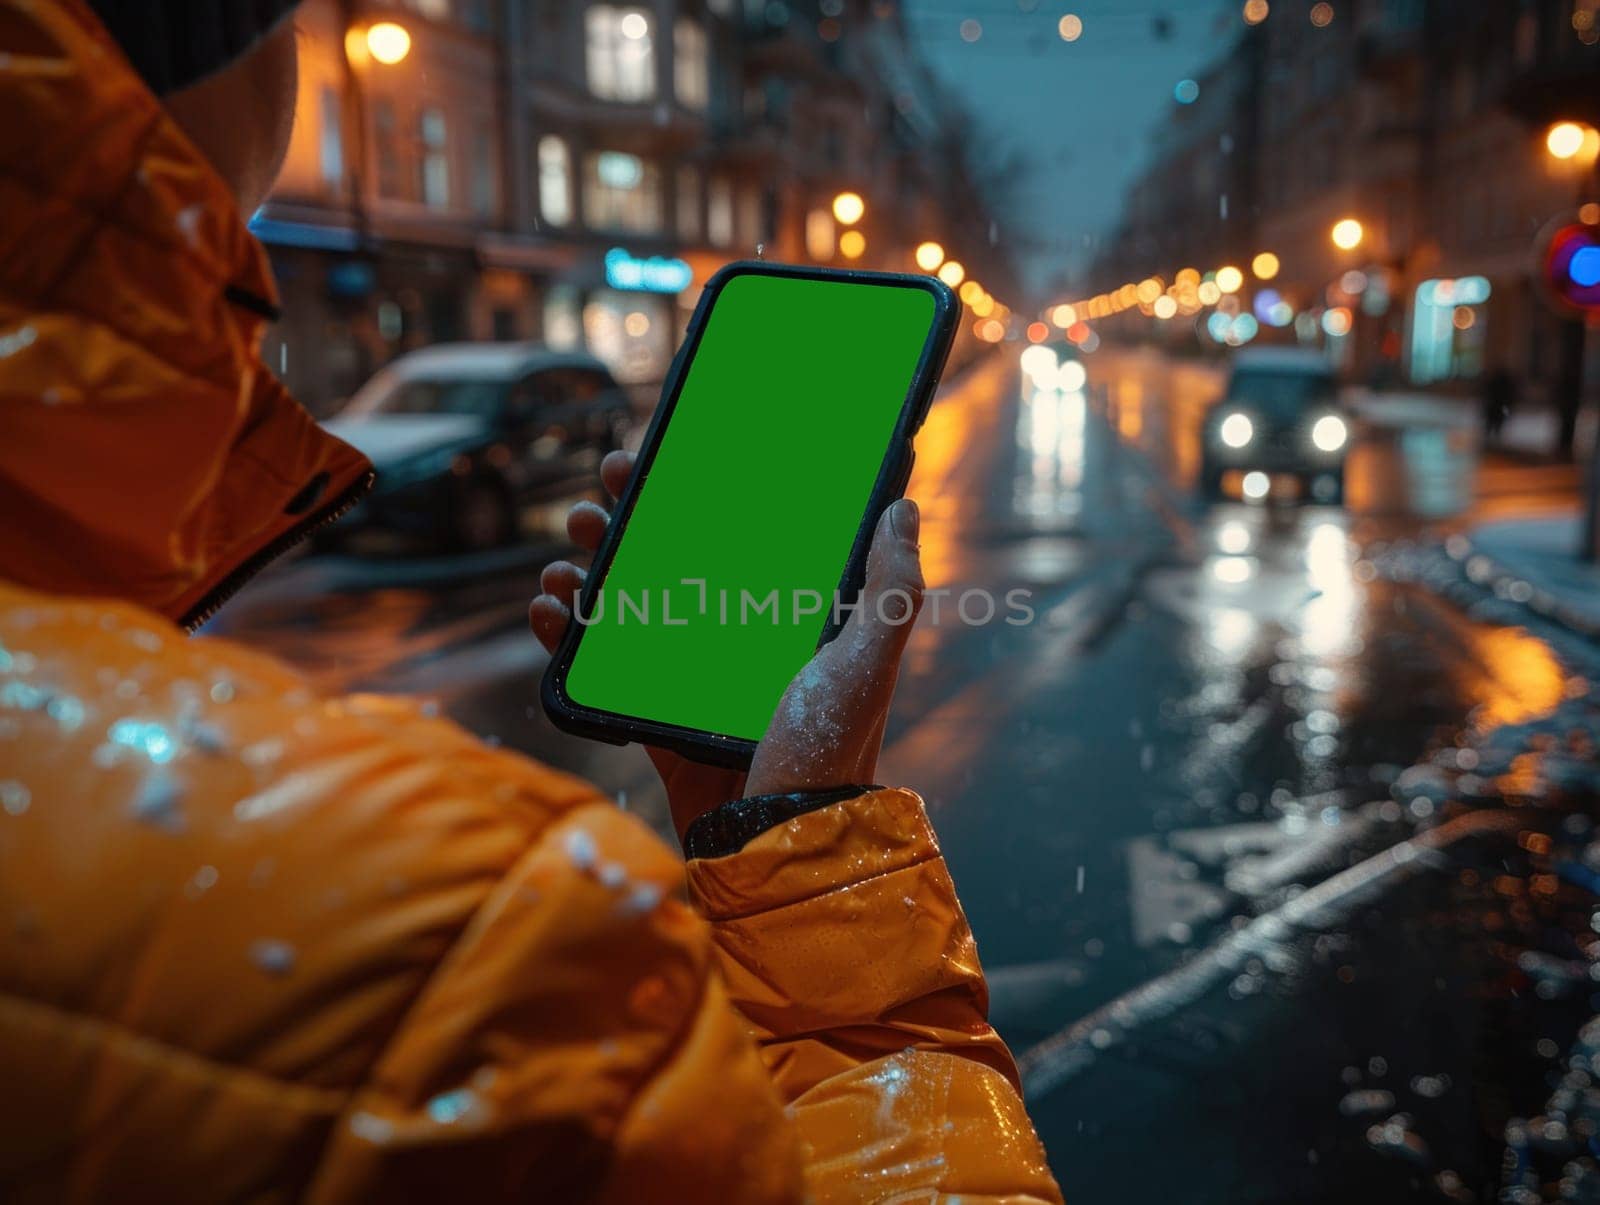 Person Holding Phone With Green Screen by but_photo